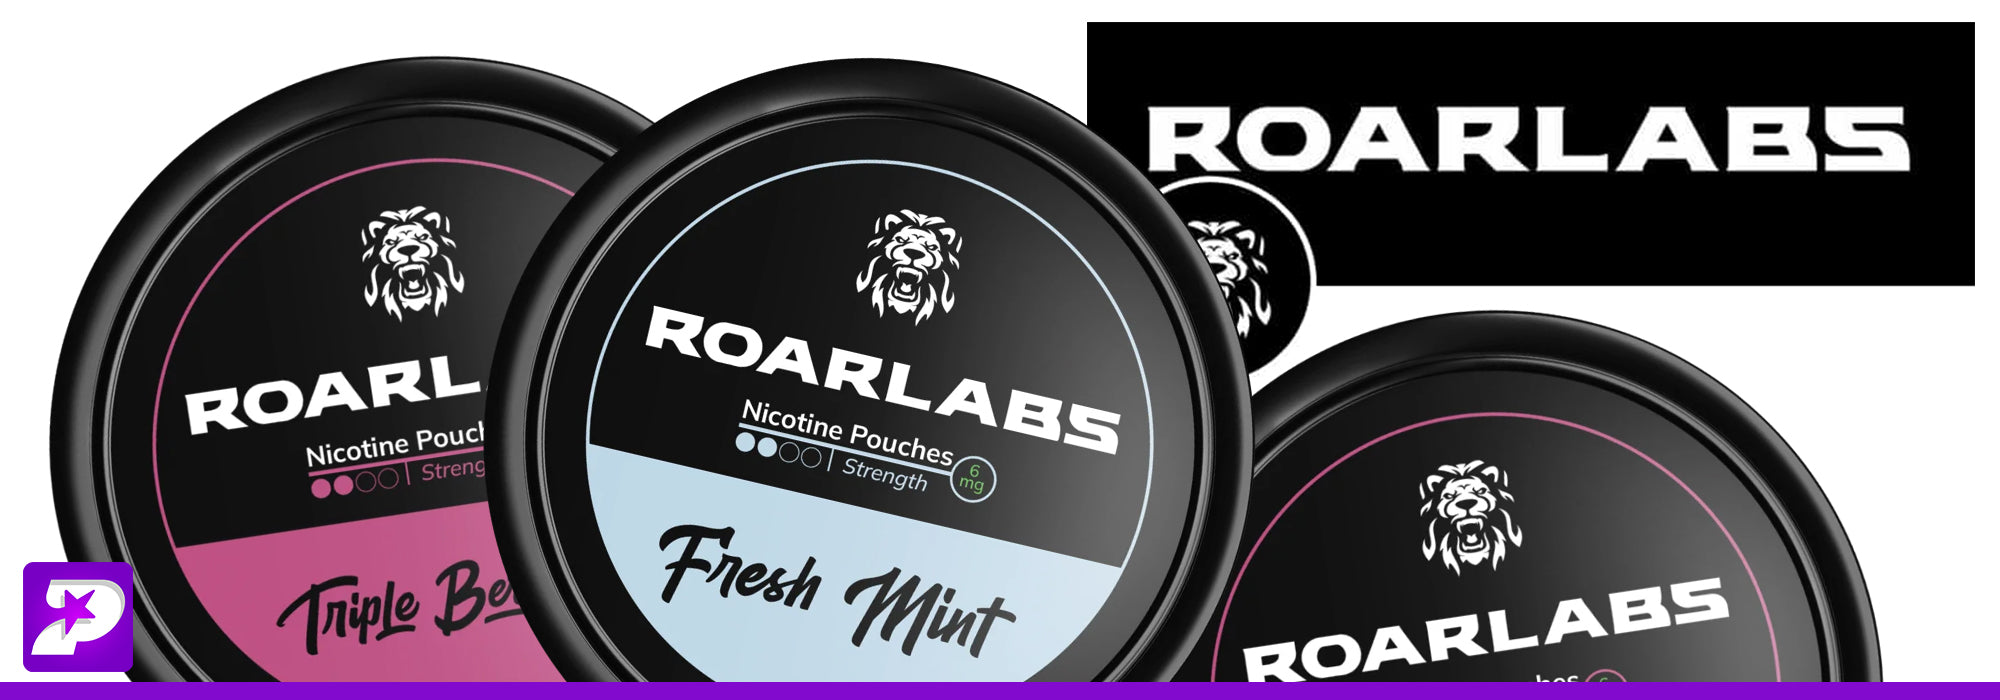 Roar Labs nicotine pouches uk